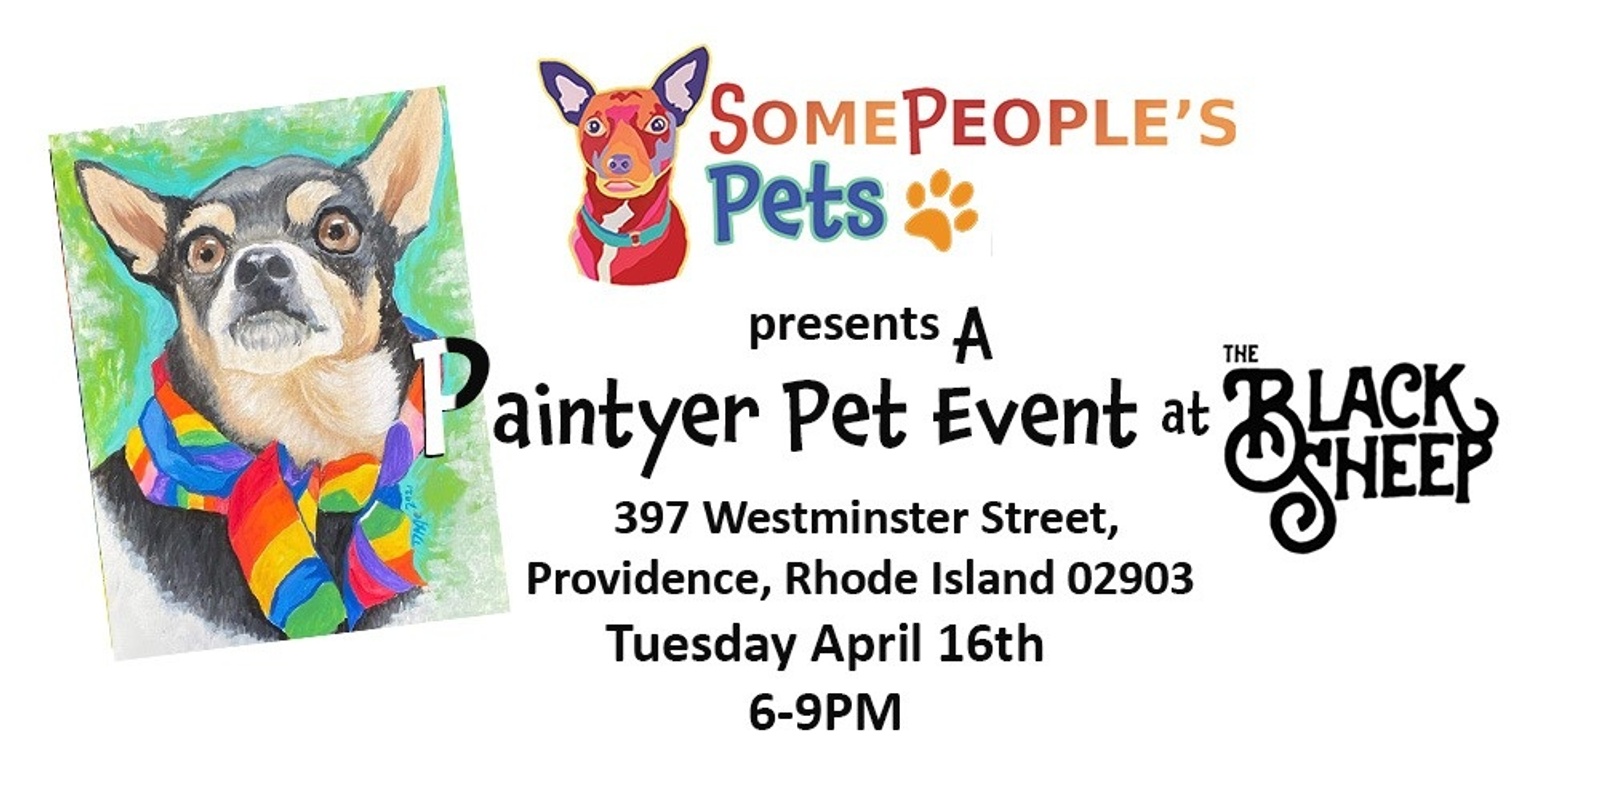 Banner image for Paintyer Pet Night at the Black Sheep in Providence RI.